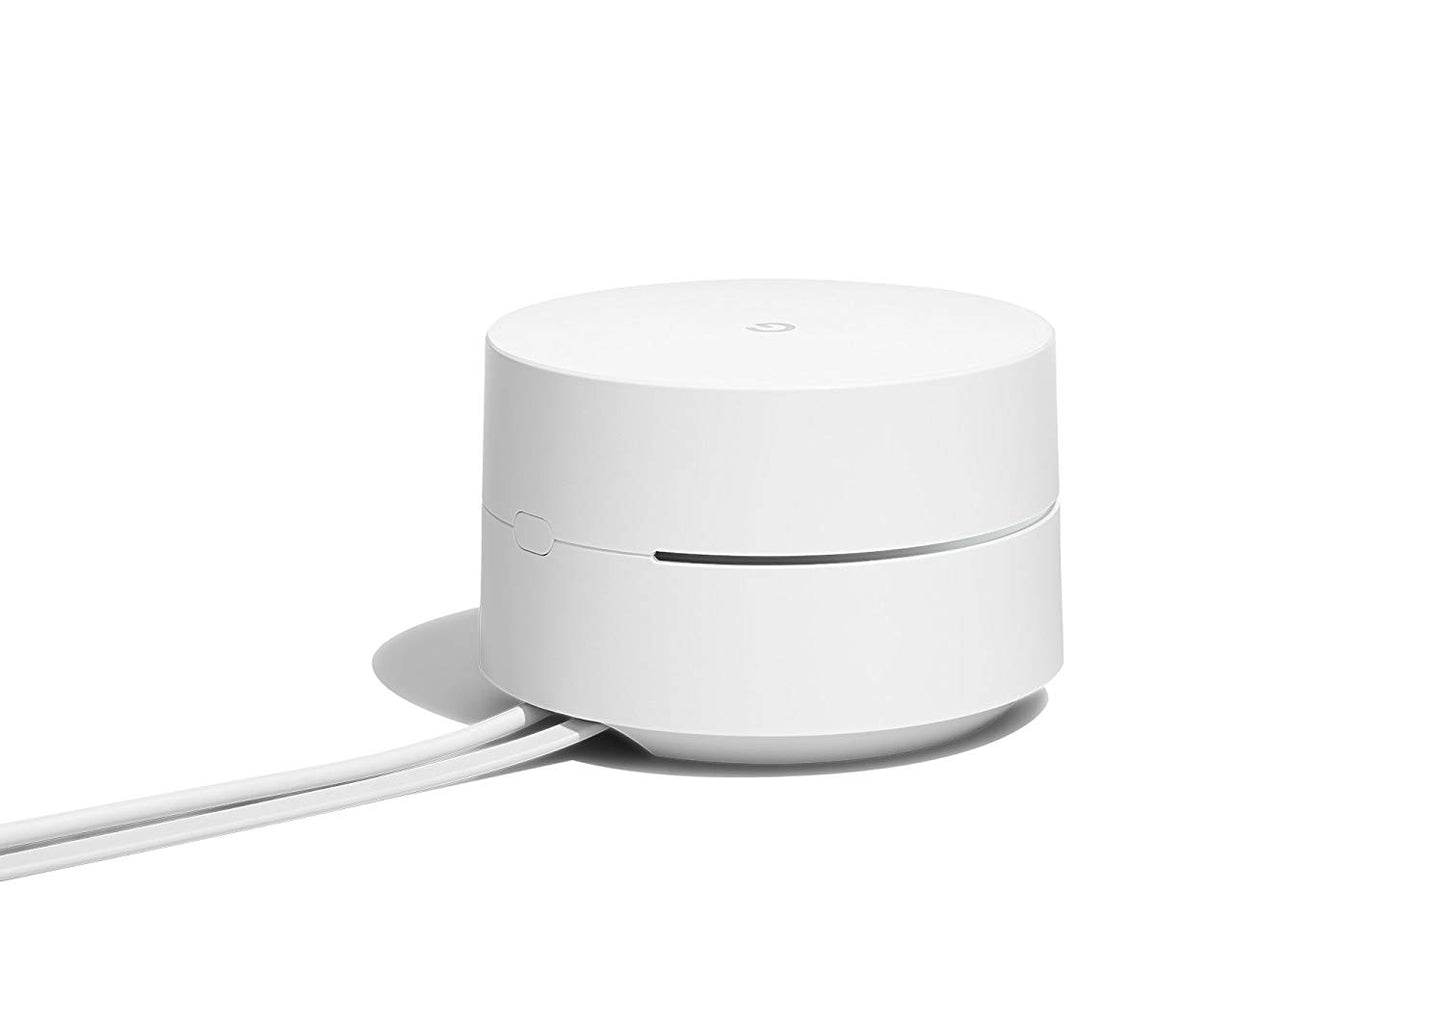 Google Wifi - AC1200 - Mesh WiFi System - Wifi Router - 4500 Sq Ft Coverage  - 3 pack